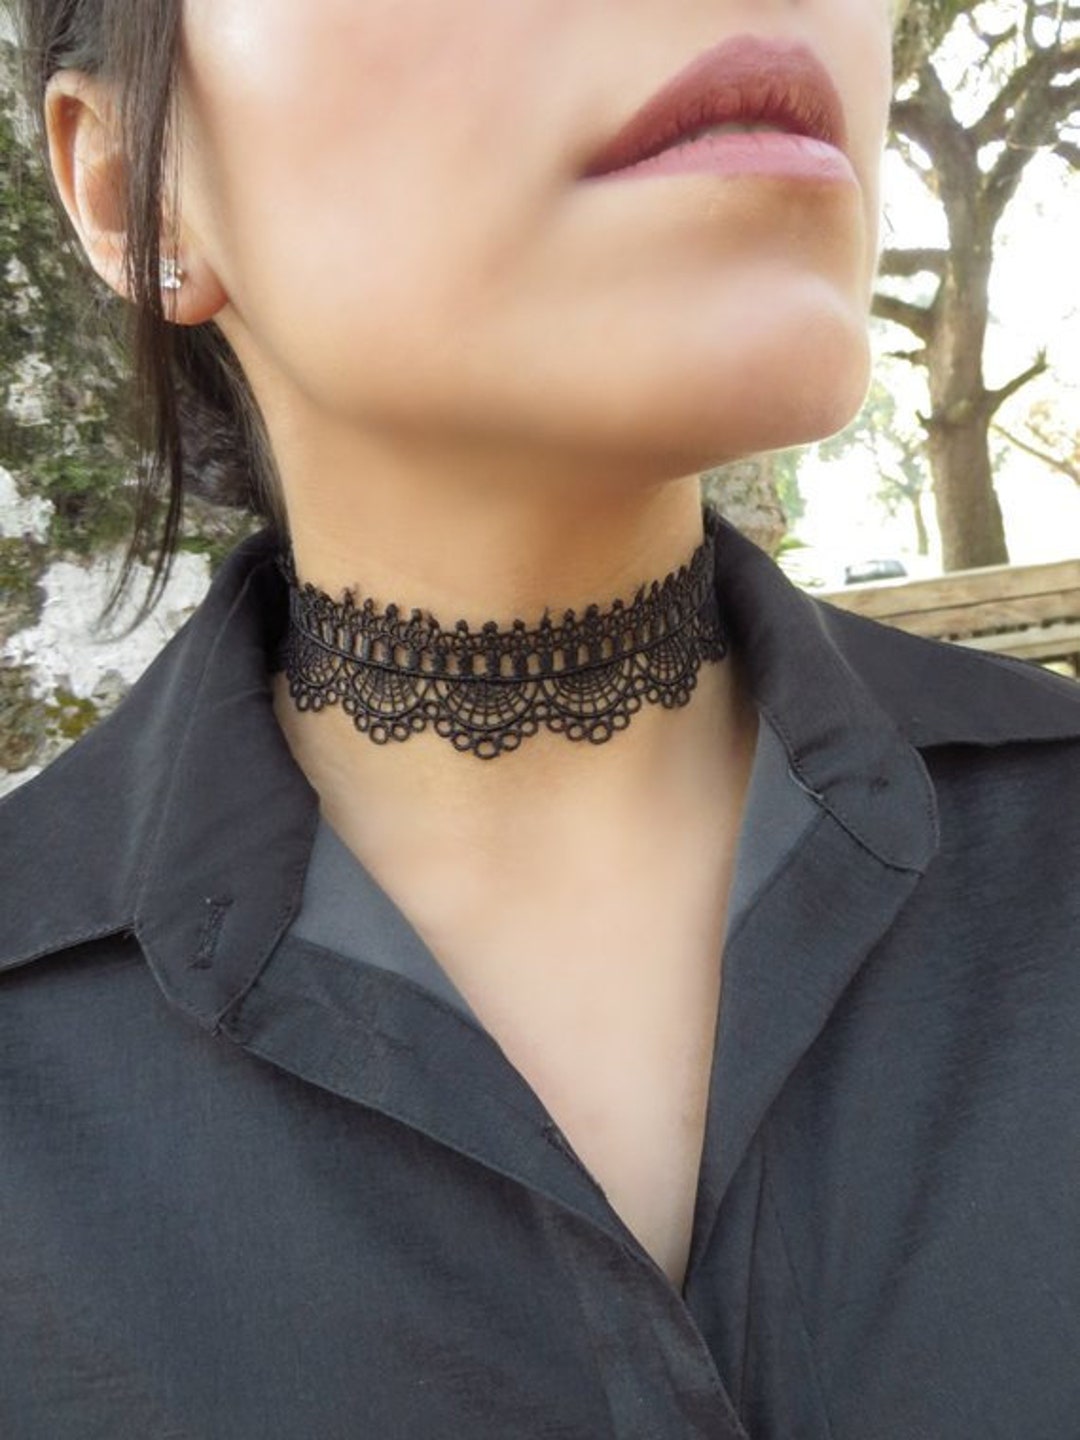 Trasfit 10 Pieces Lace Choker Necklace for Women Girls, Black Classic  Velvet Stretch Punk Gothic Tattoo Lace